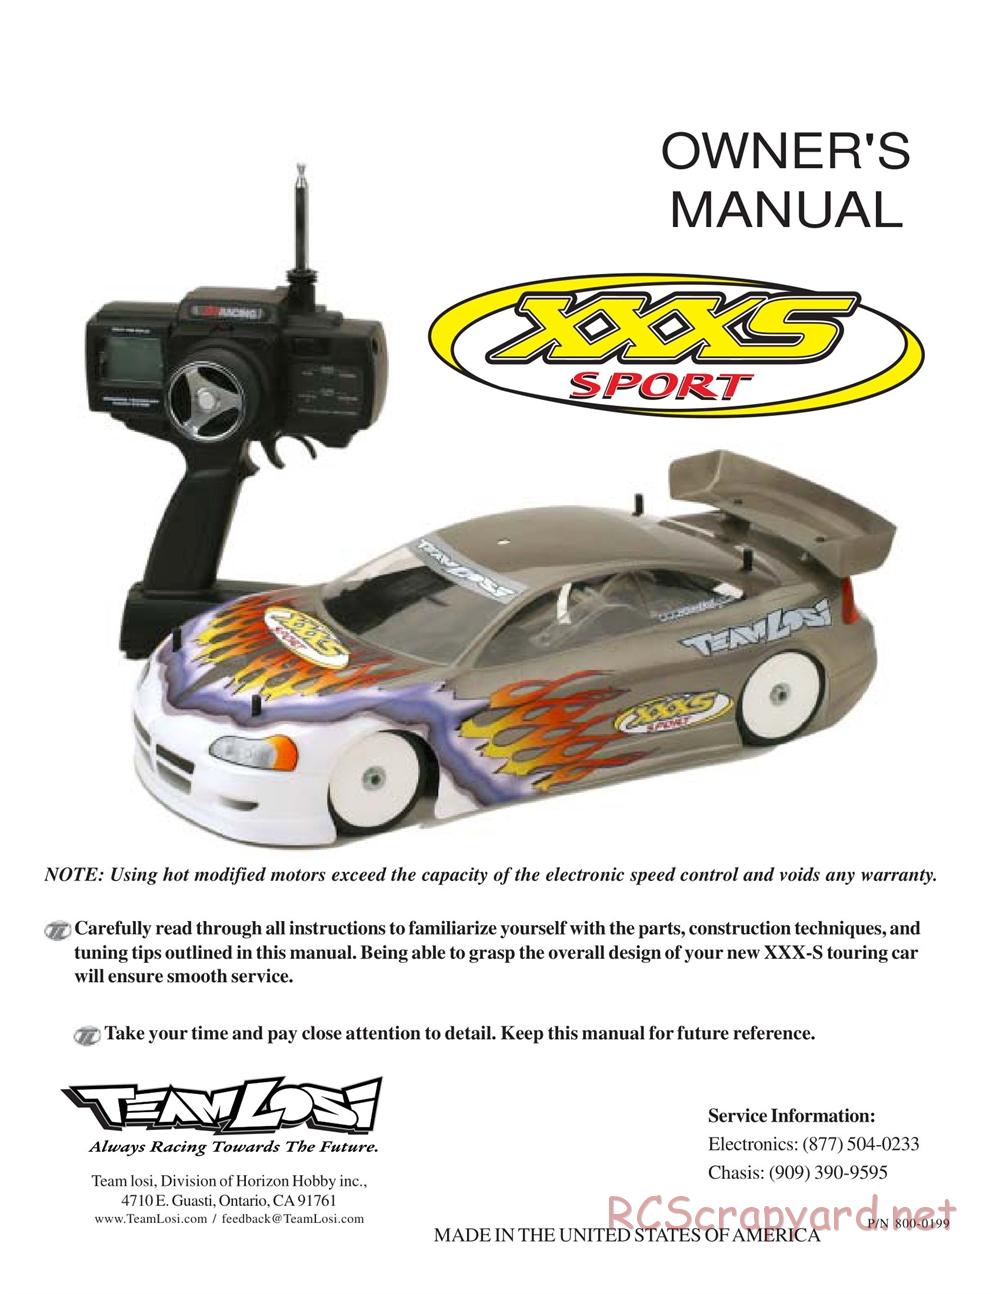 Team Losi - XXX-S Sport - Manual - Page 1